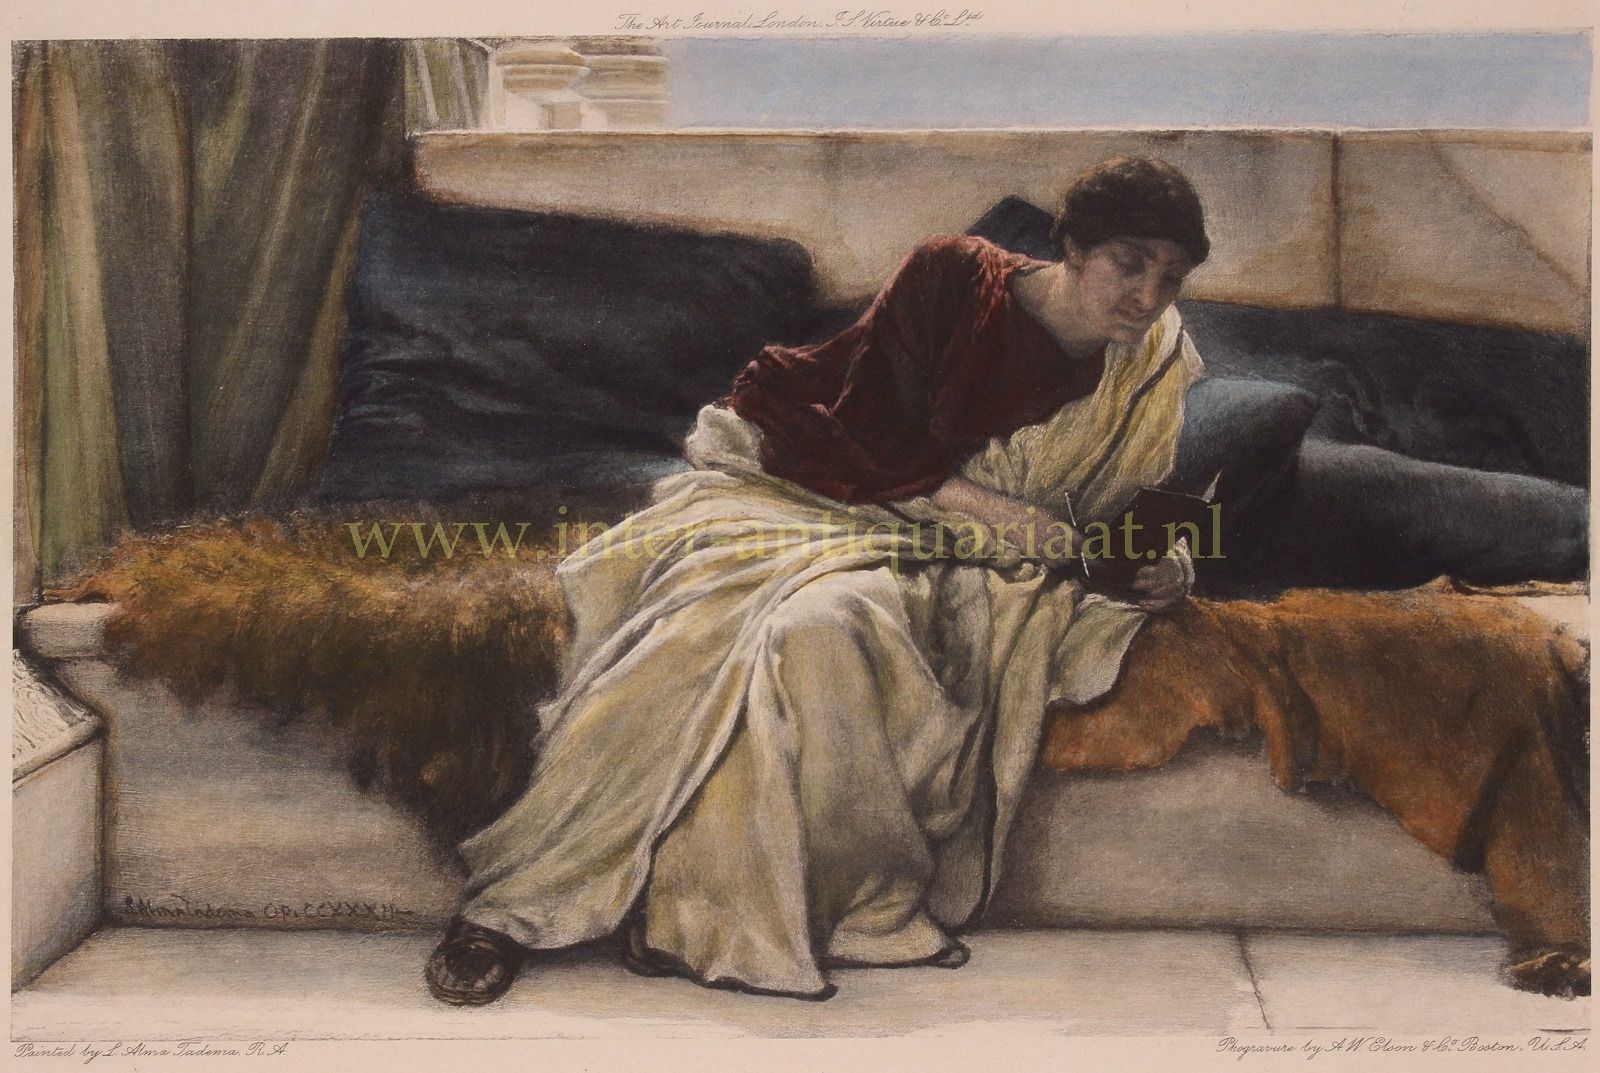 Alma-Tadema-- Sir Lawrence - A Difficult Line from Horace - Sir Lawrence Alma-Tadema, 1882